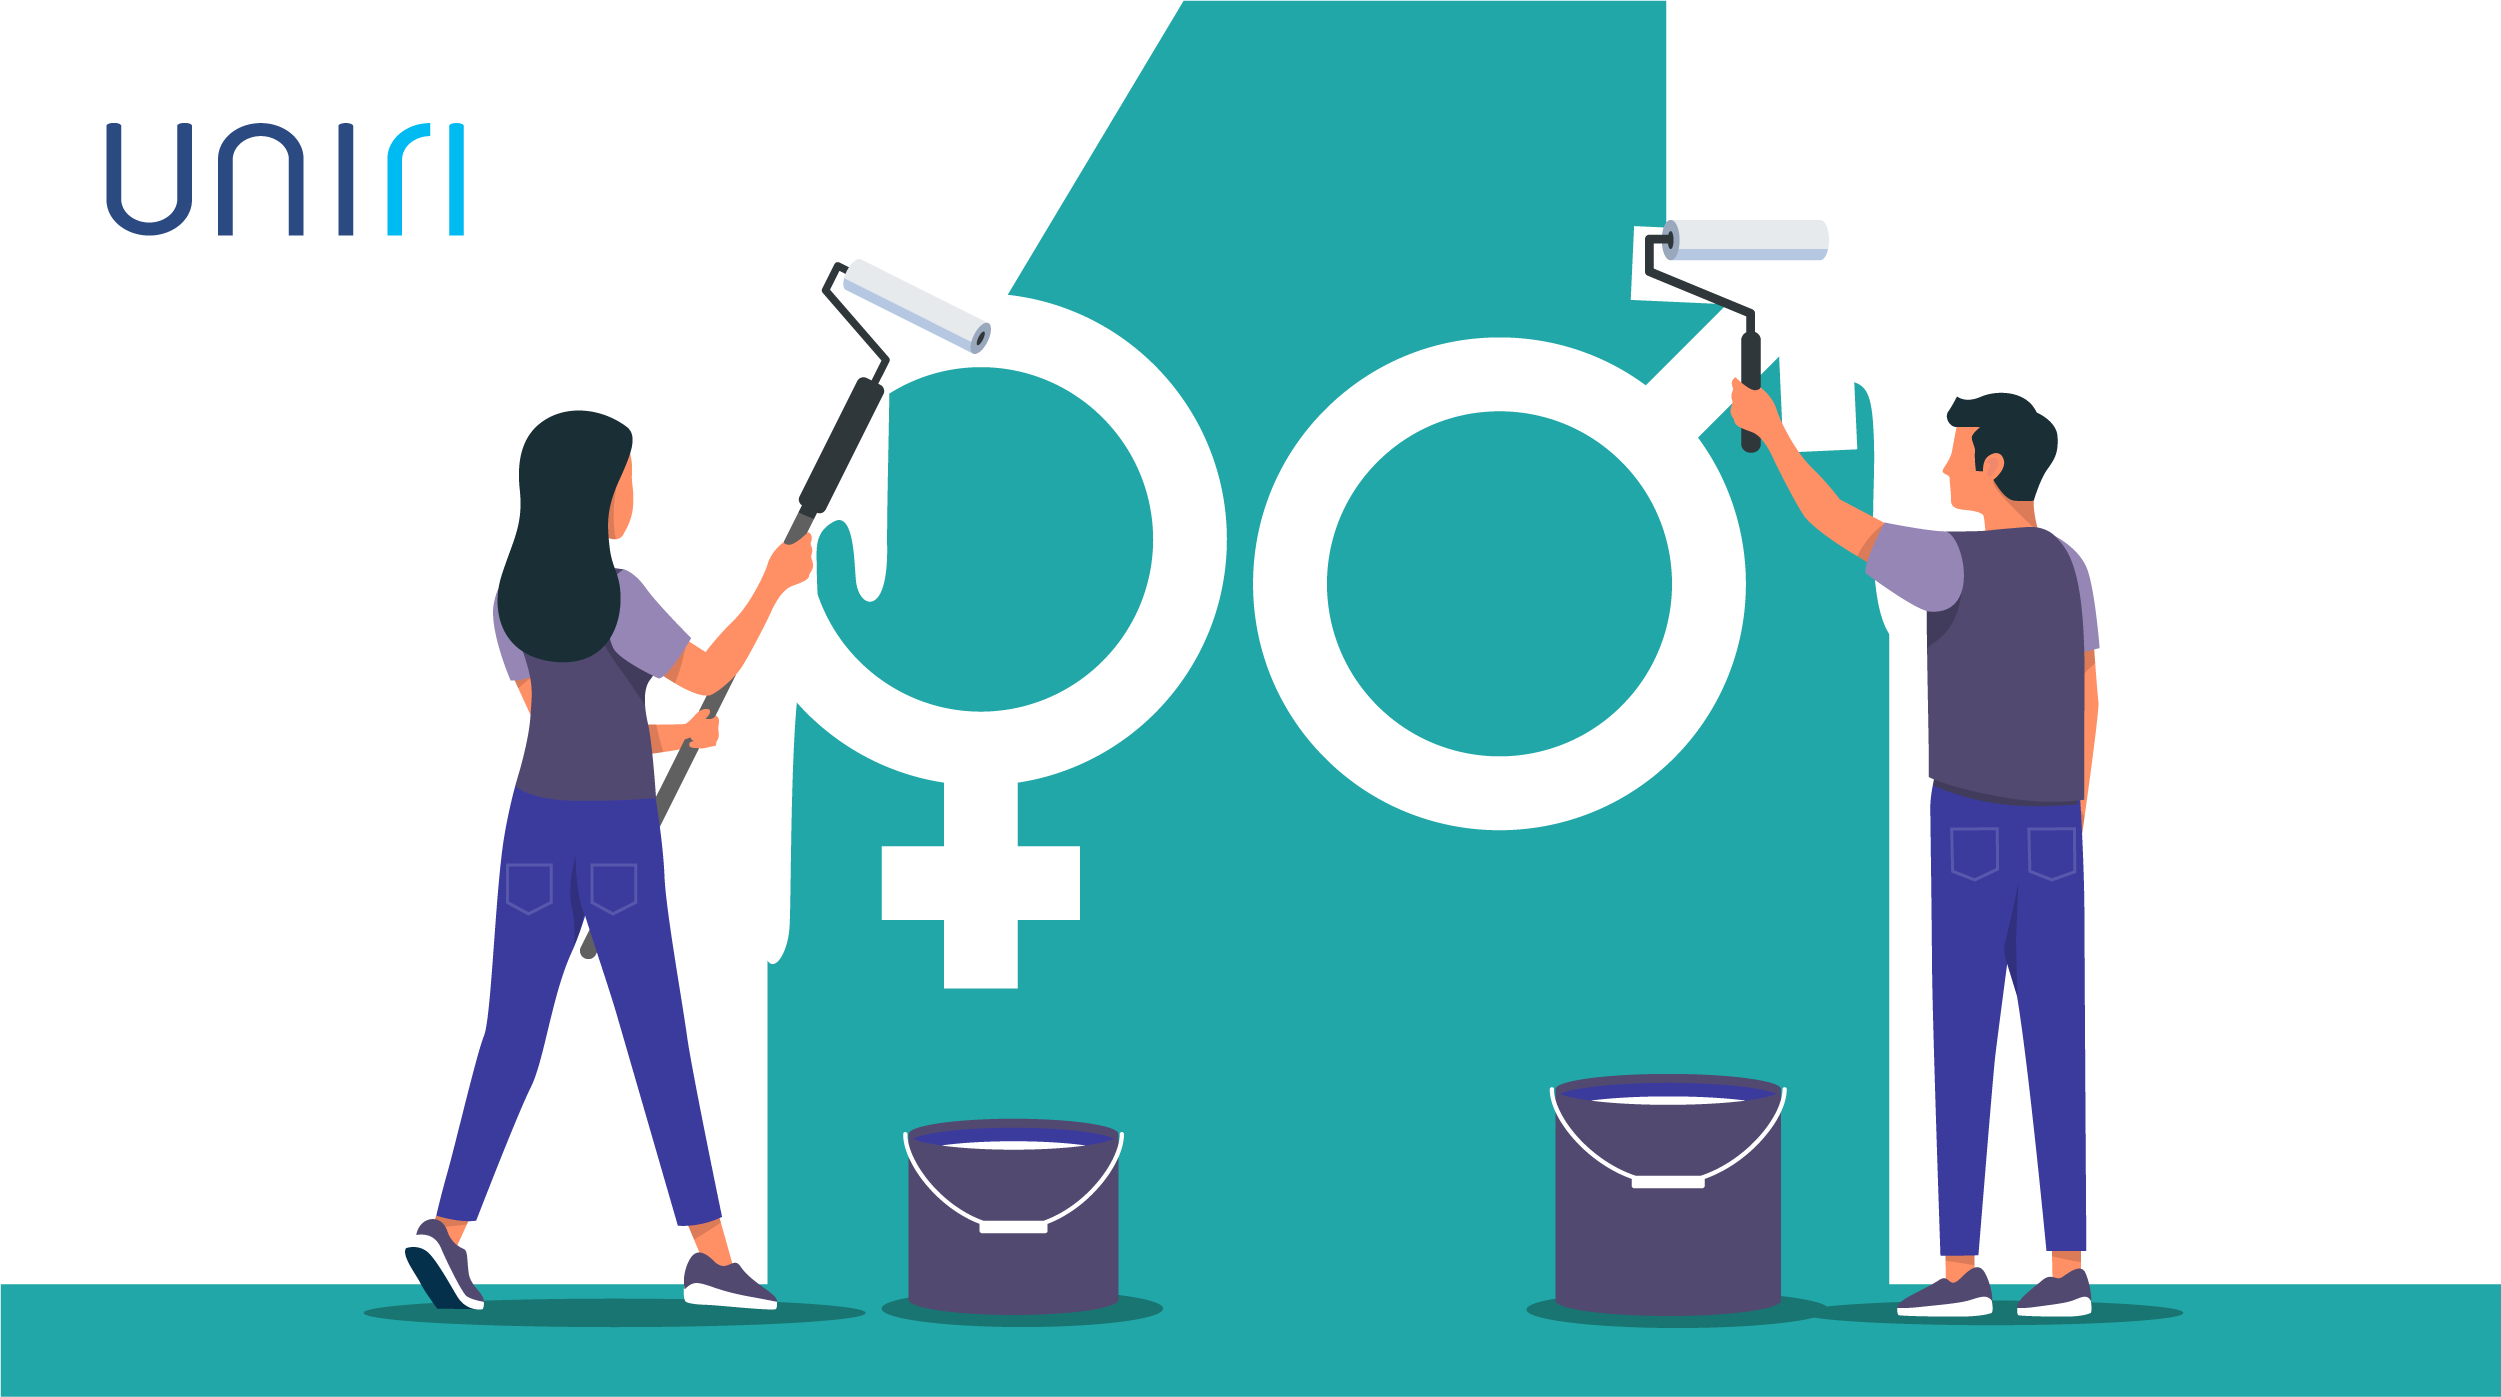 Gender Equality Plans as representations of equality beyond a university